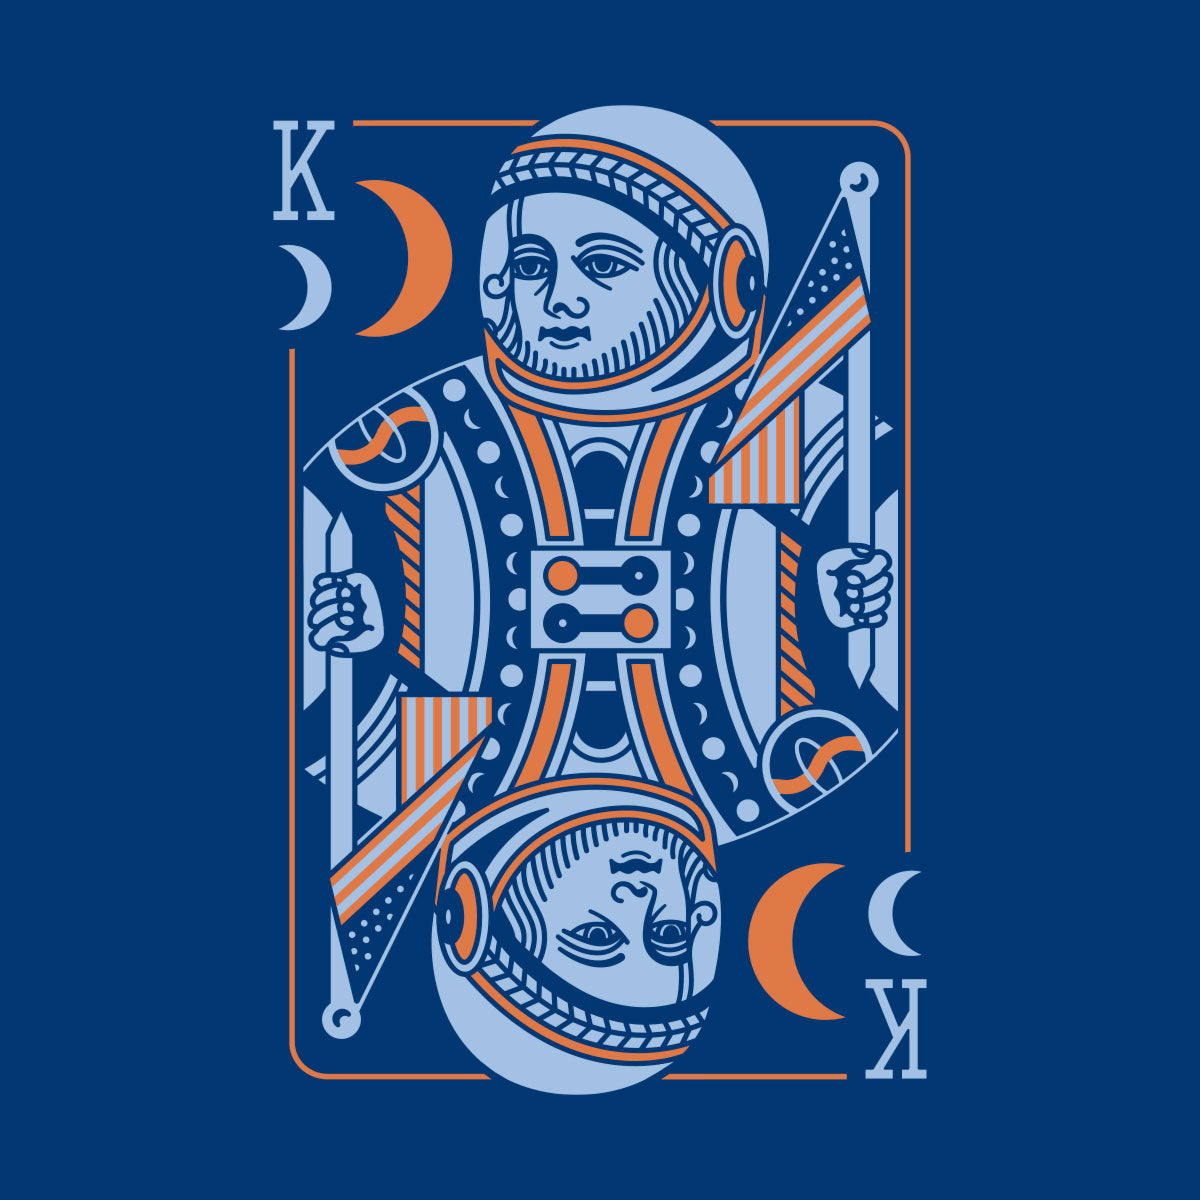 Thumbnail of "King of Moons" playing card on blue background